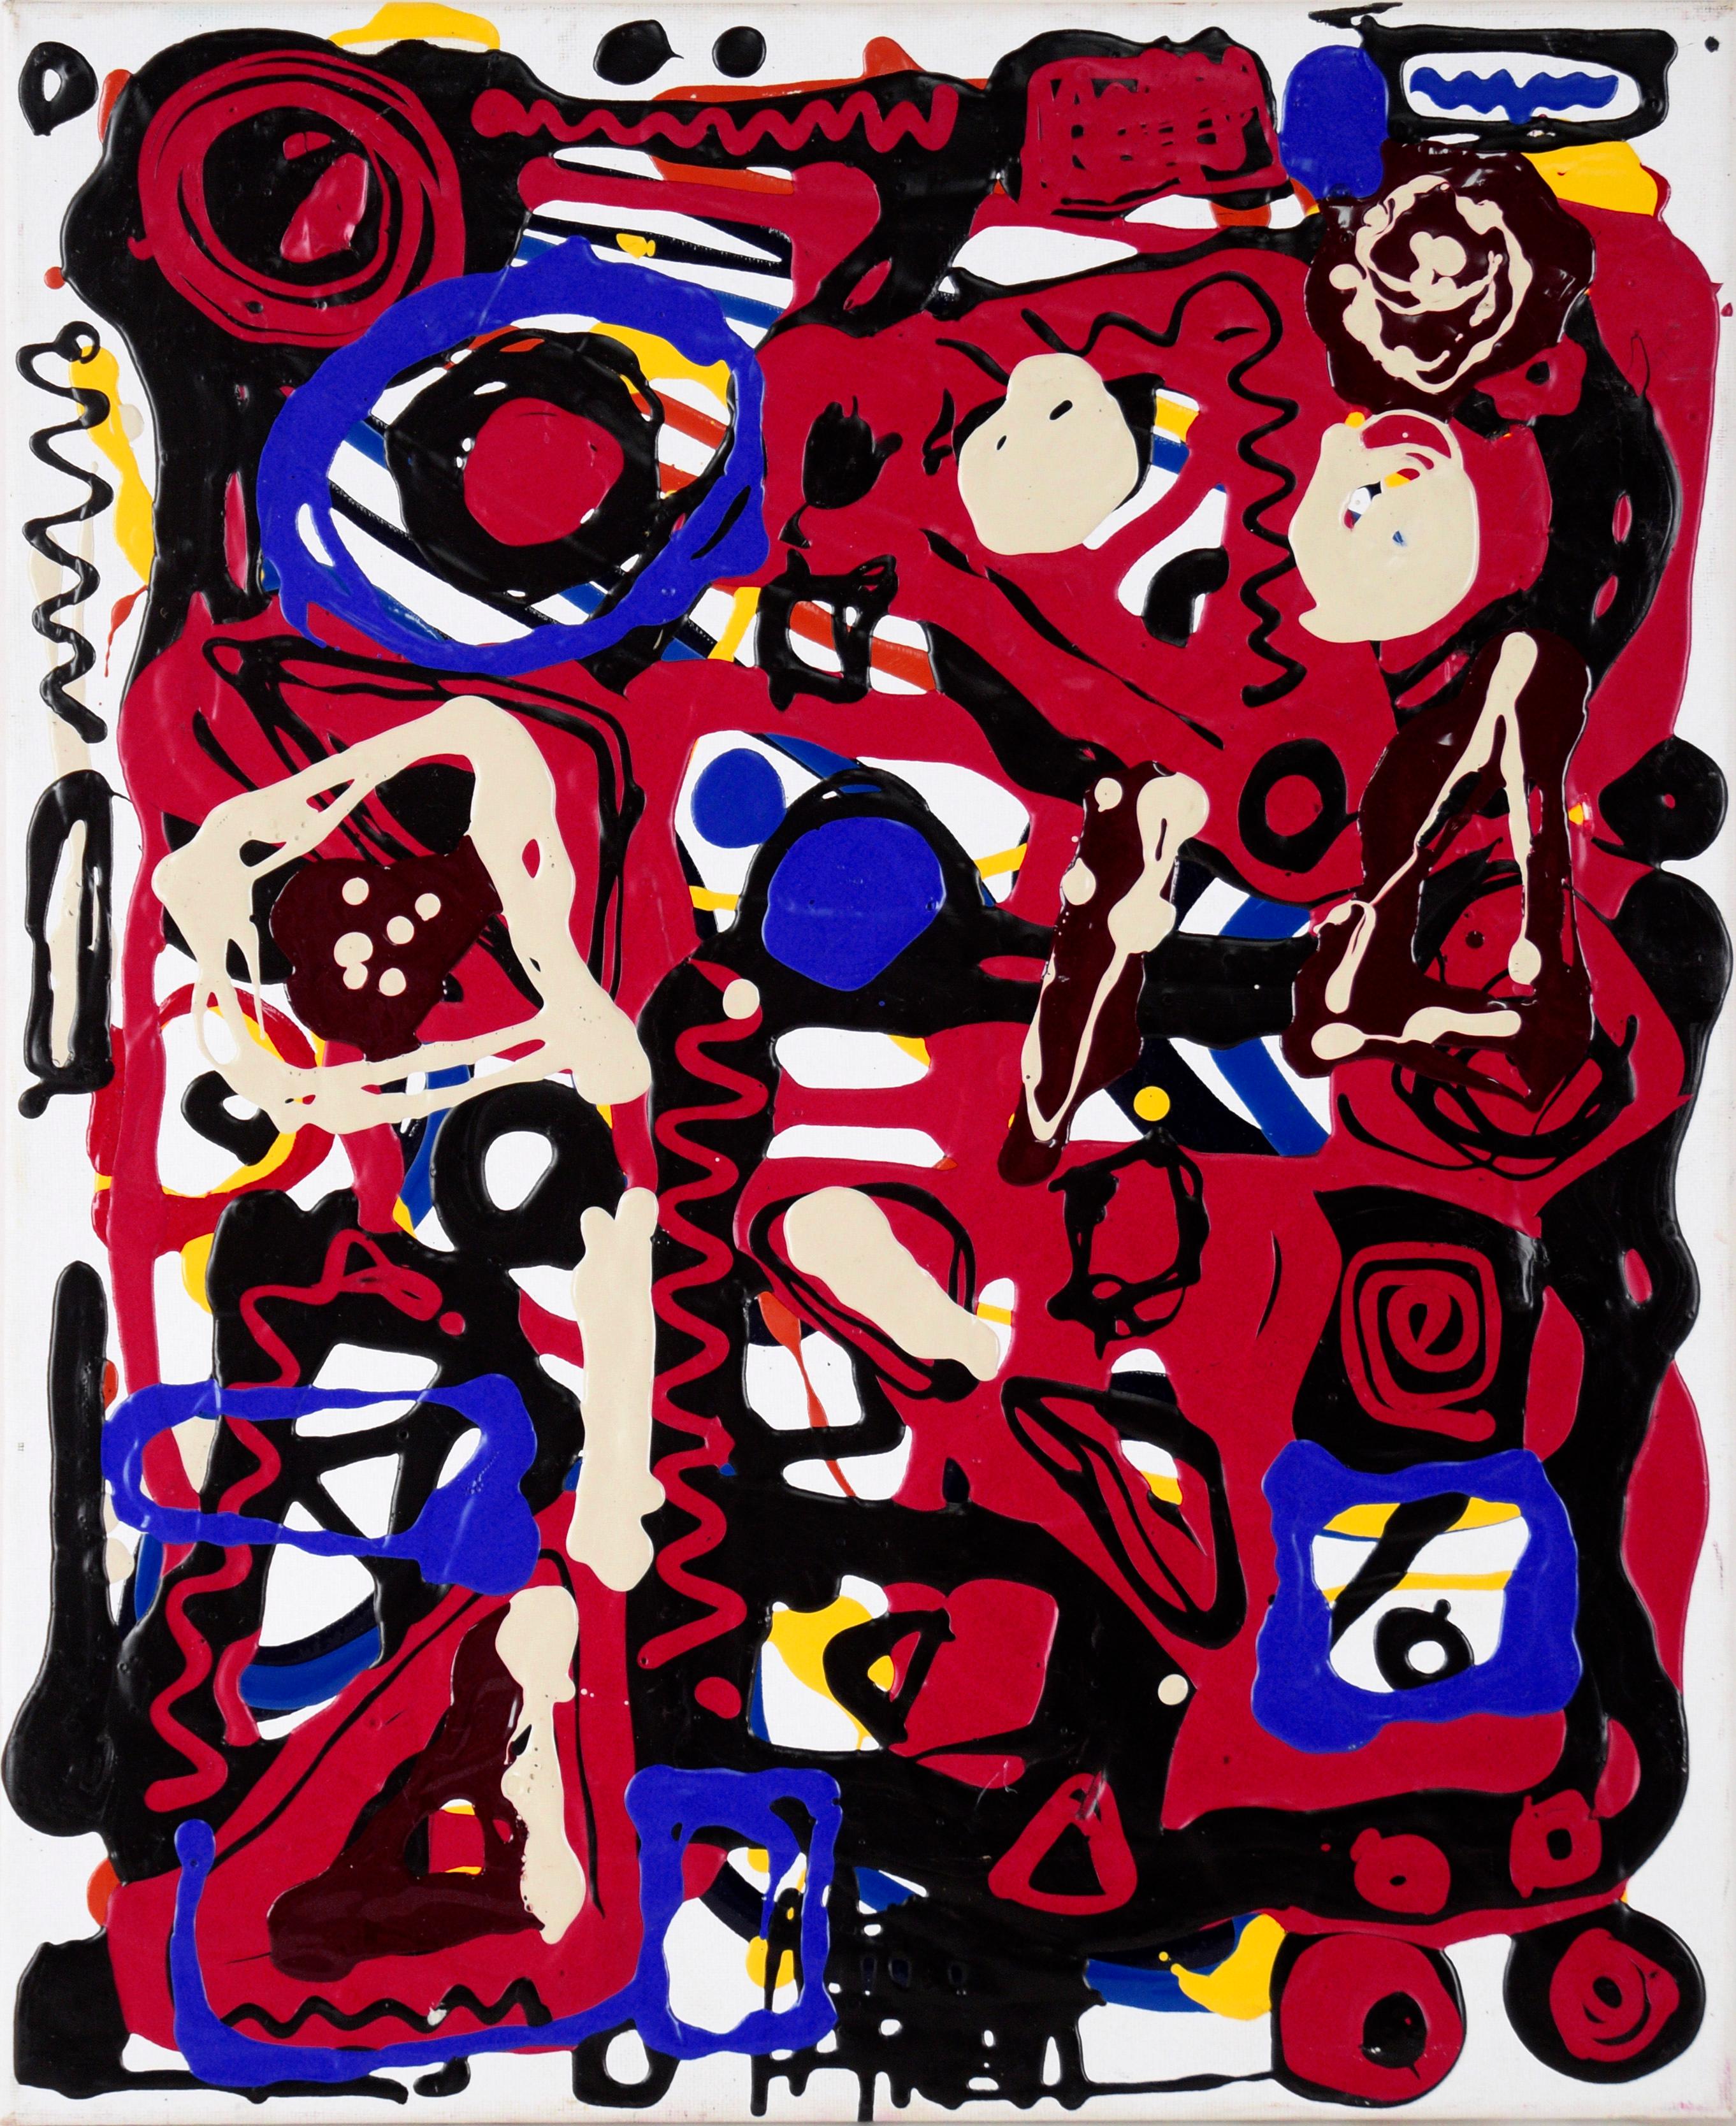 Unknown Abstract Painting - Abstract Expressionist Composition in Red, Black, and Blue Acrylic on Canvas 